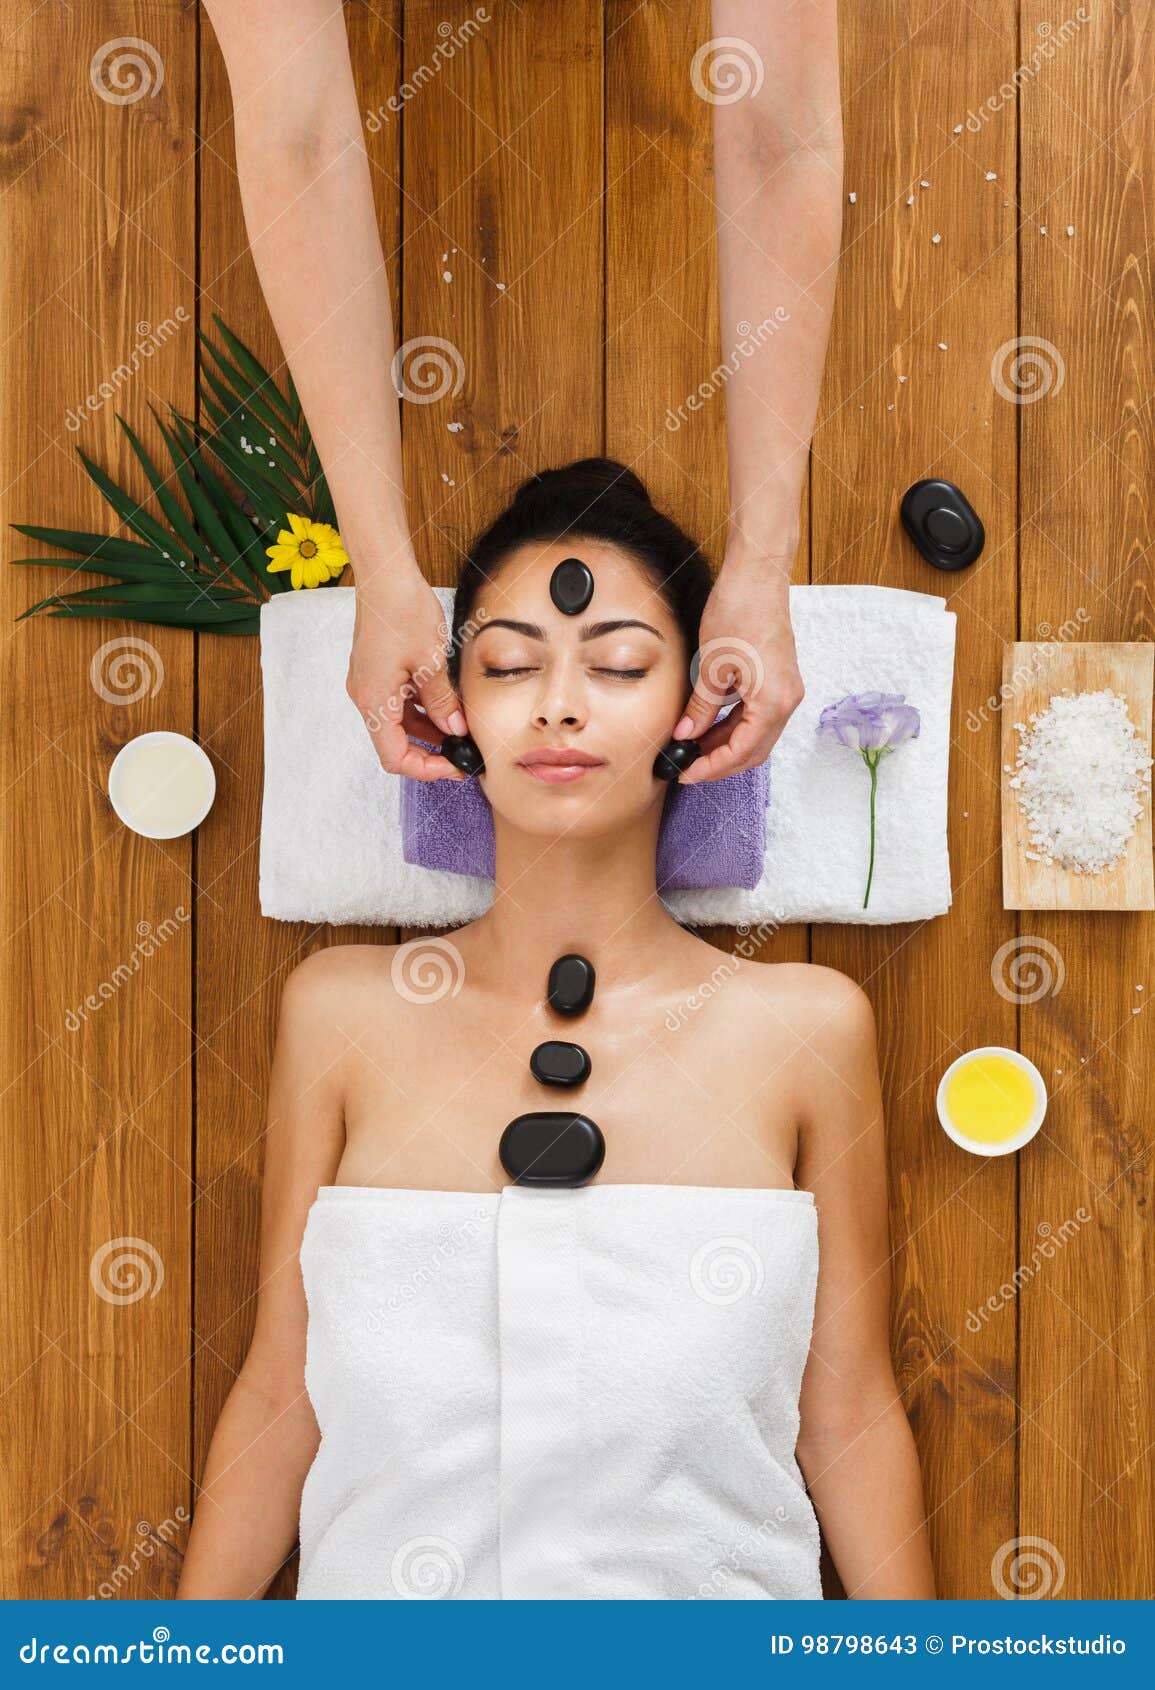 Beautician Make Stone Massage Spa For Woman At Wellness Center Stock